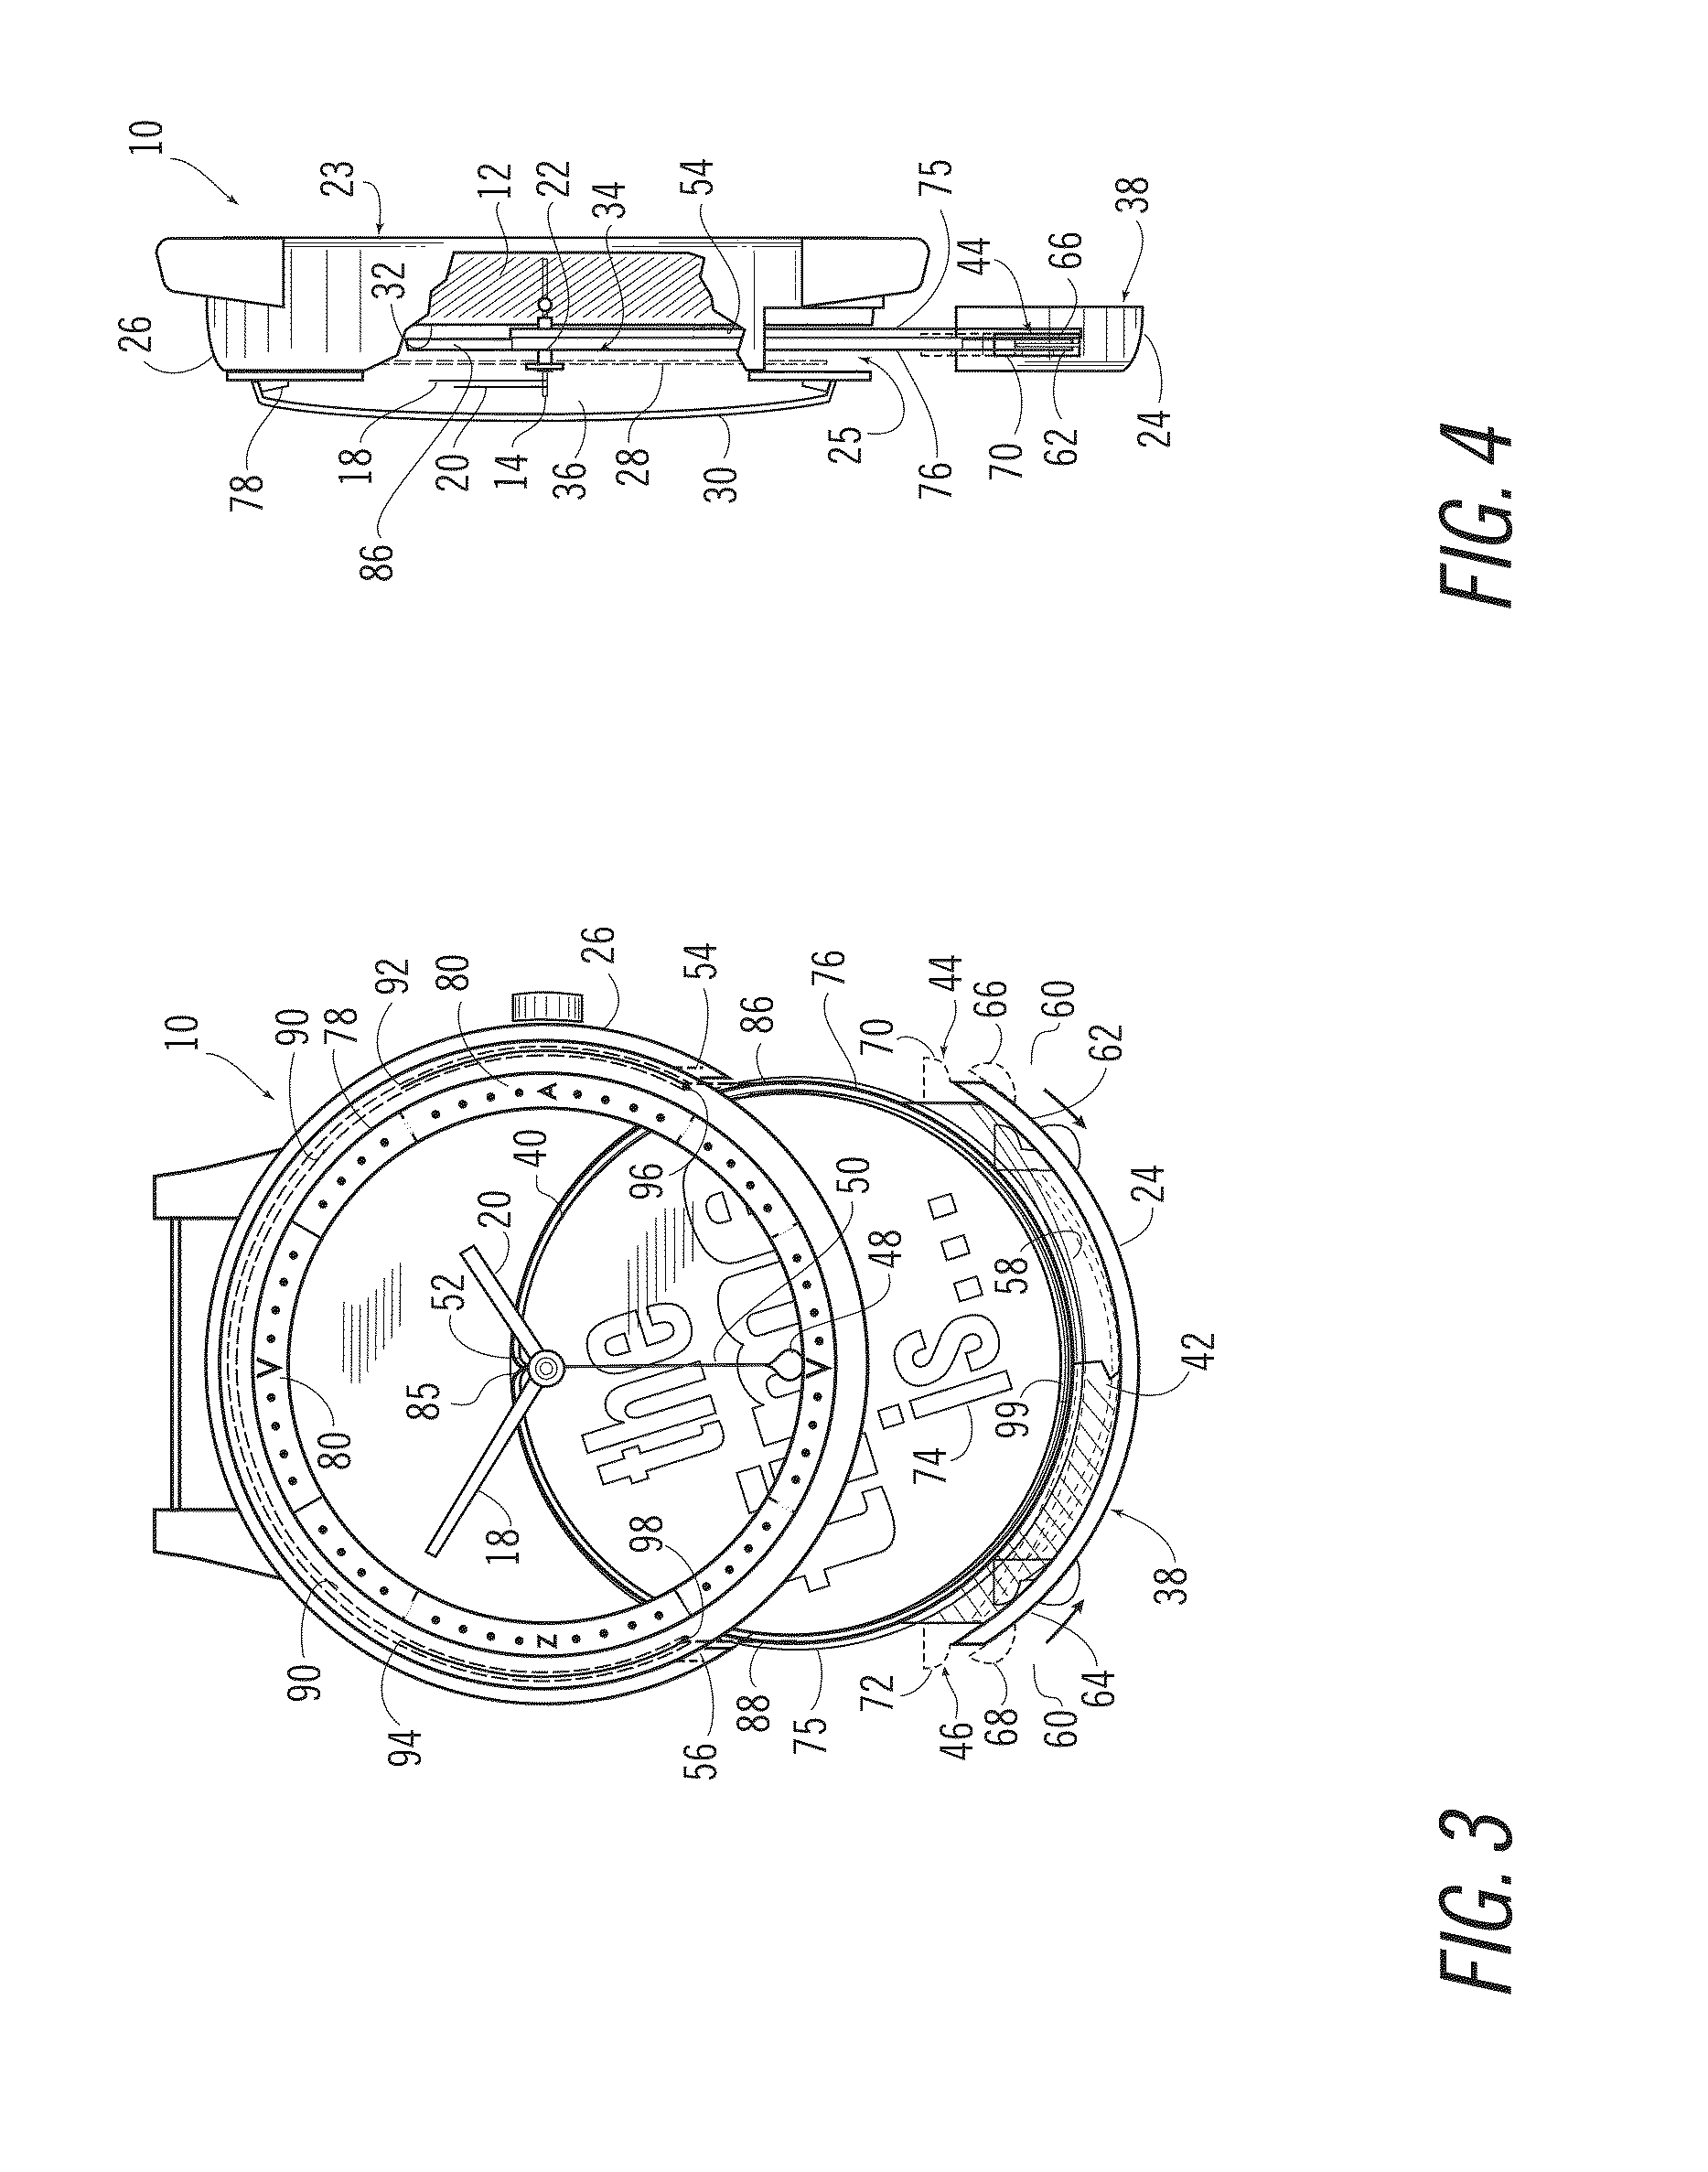 Apparatus for Horologe with Removable and Interchangeable Face